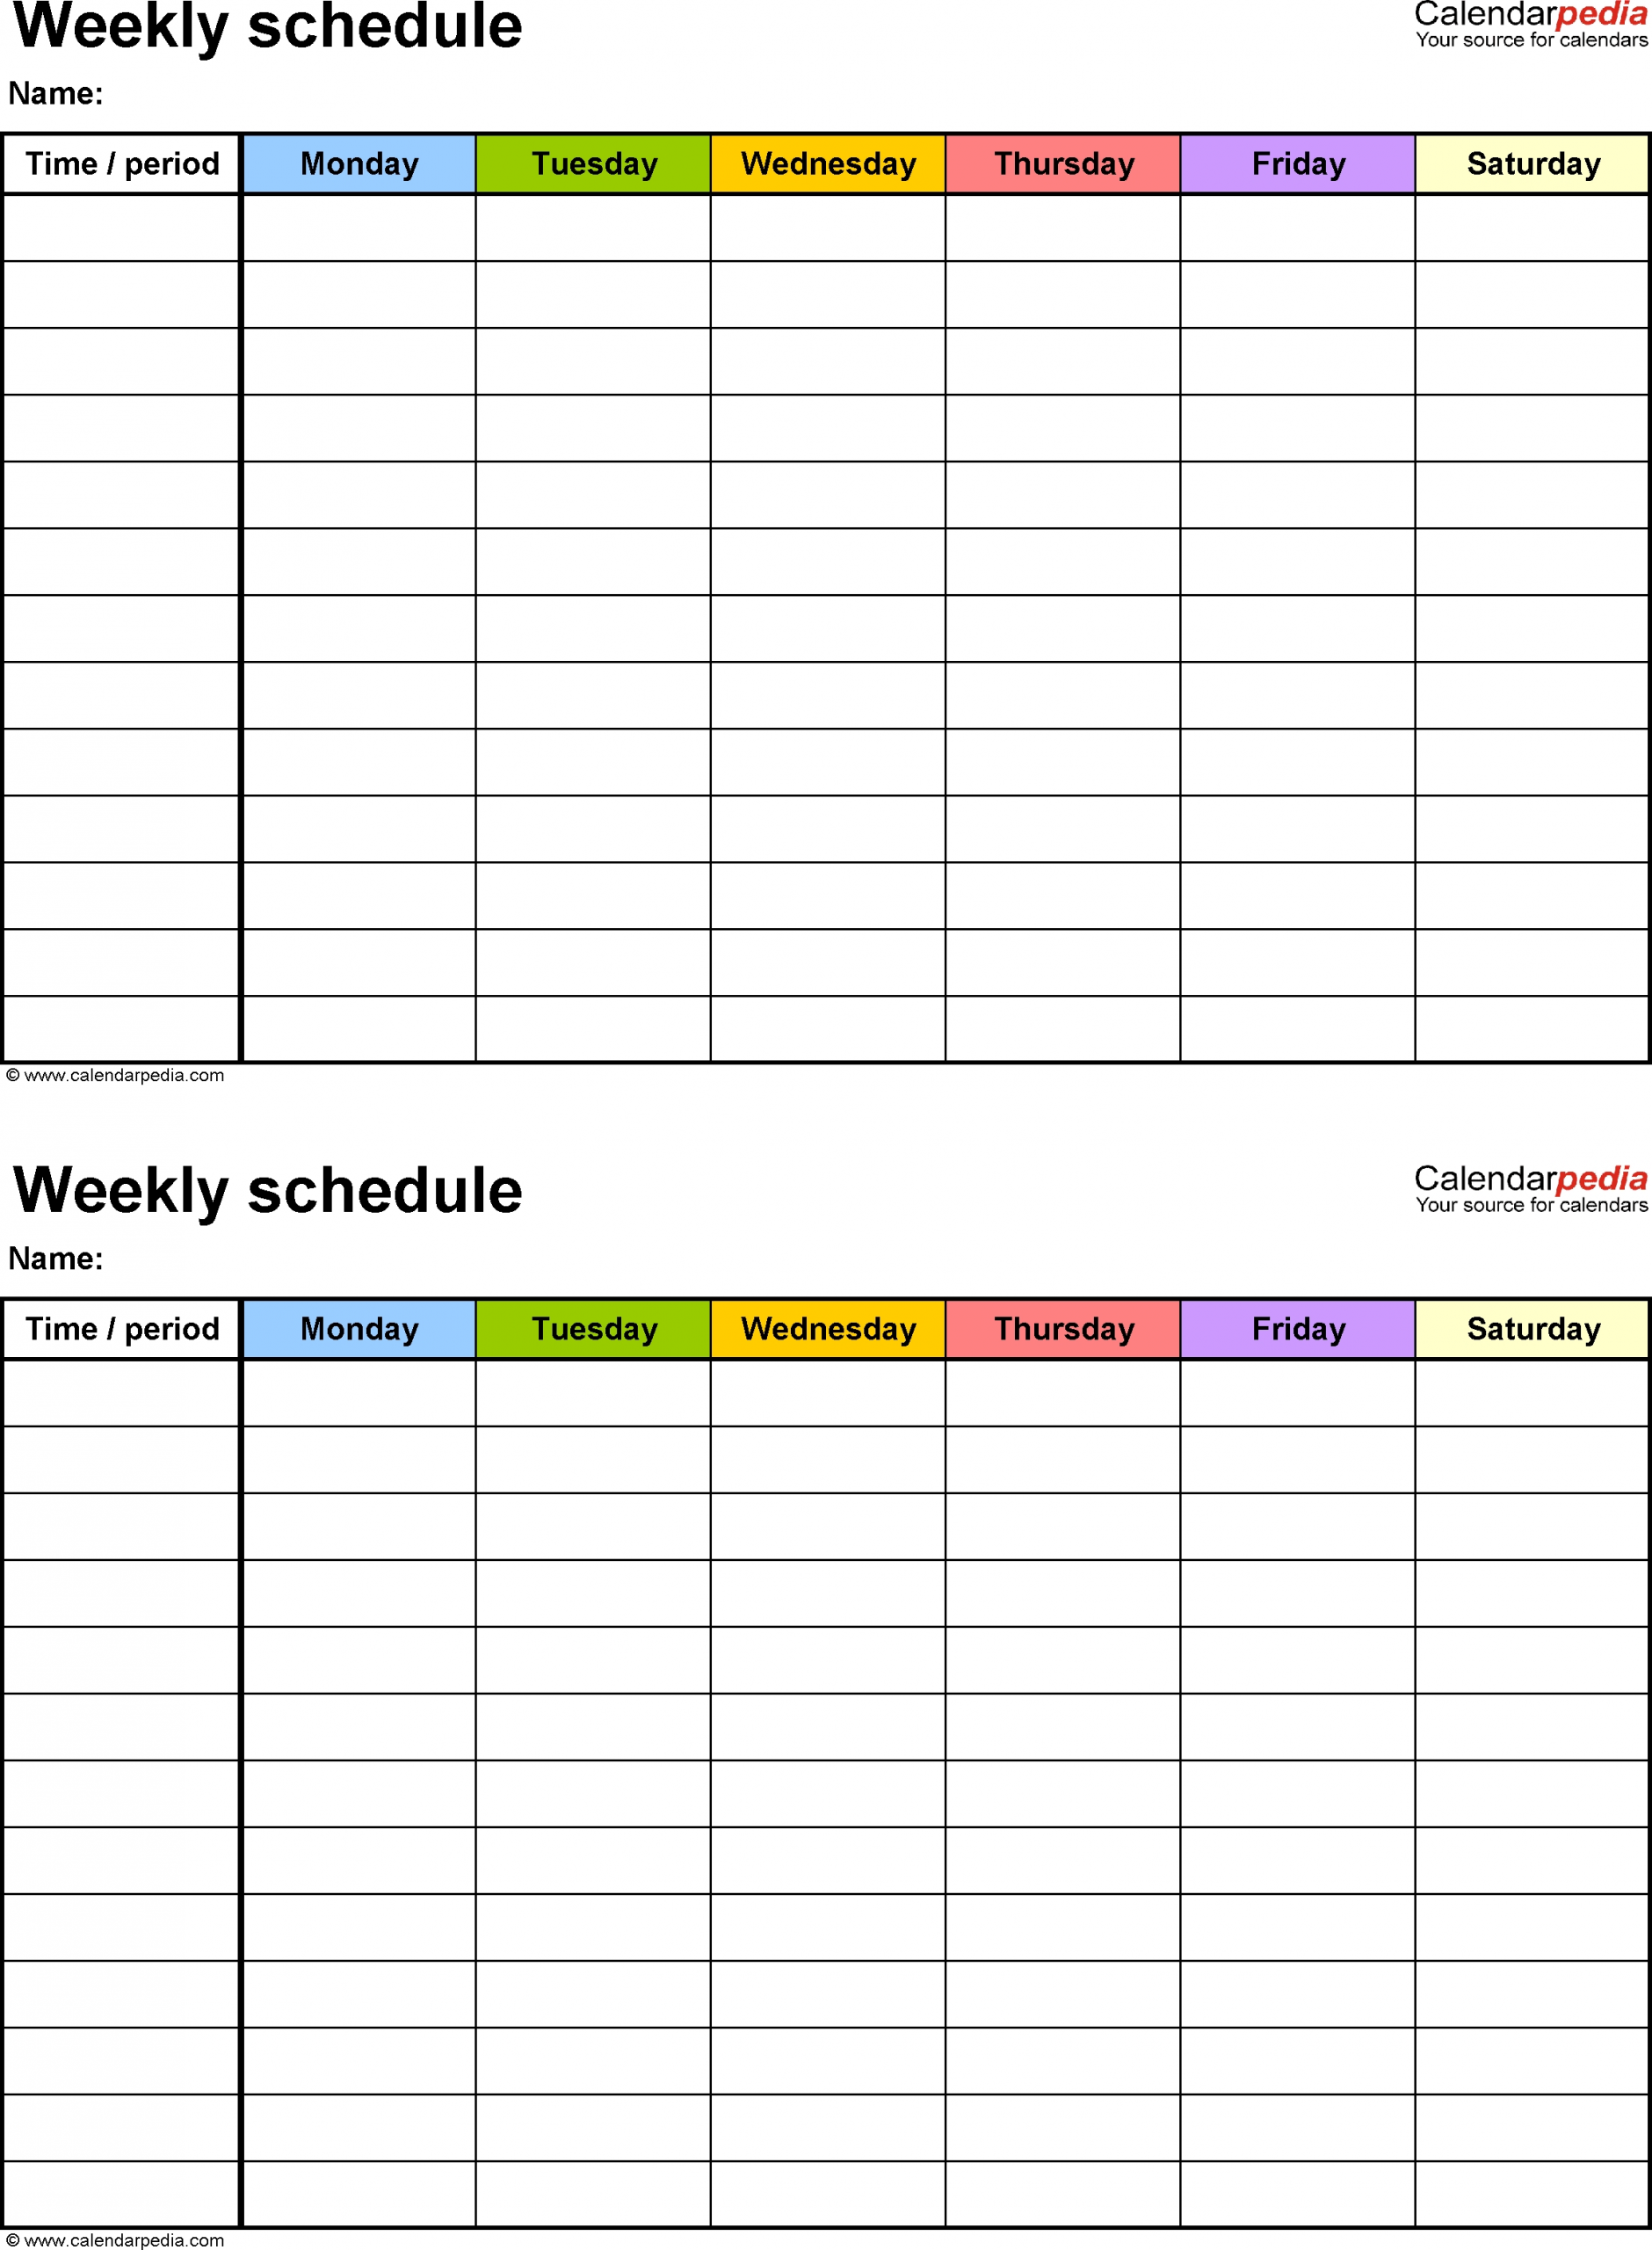 Free Weekly Schedule Templates For Word - 18 Templates for Days Of The Week Calendar Template